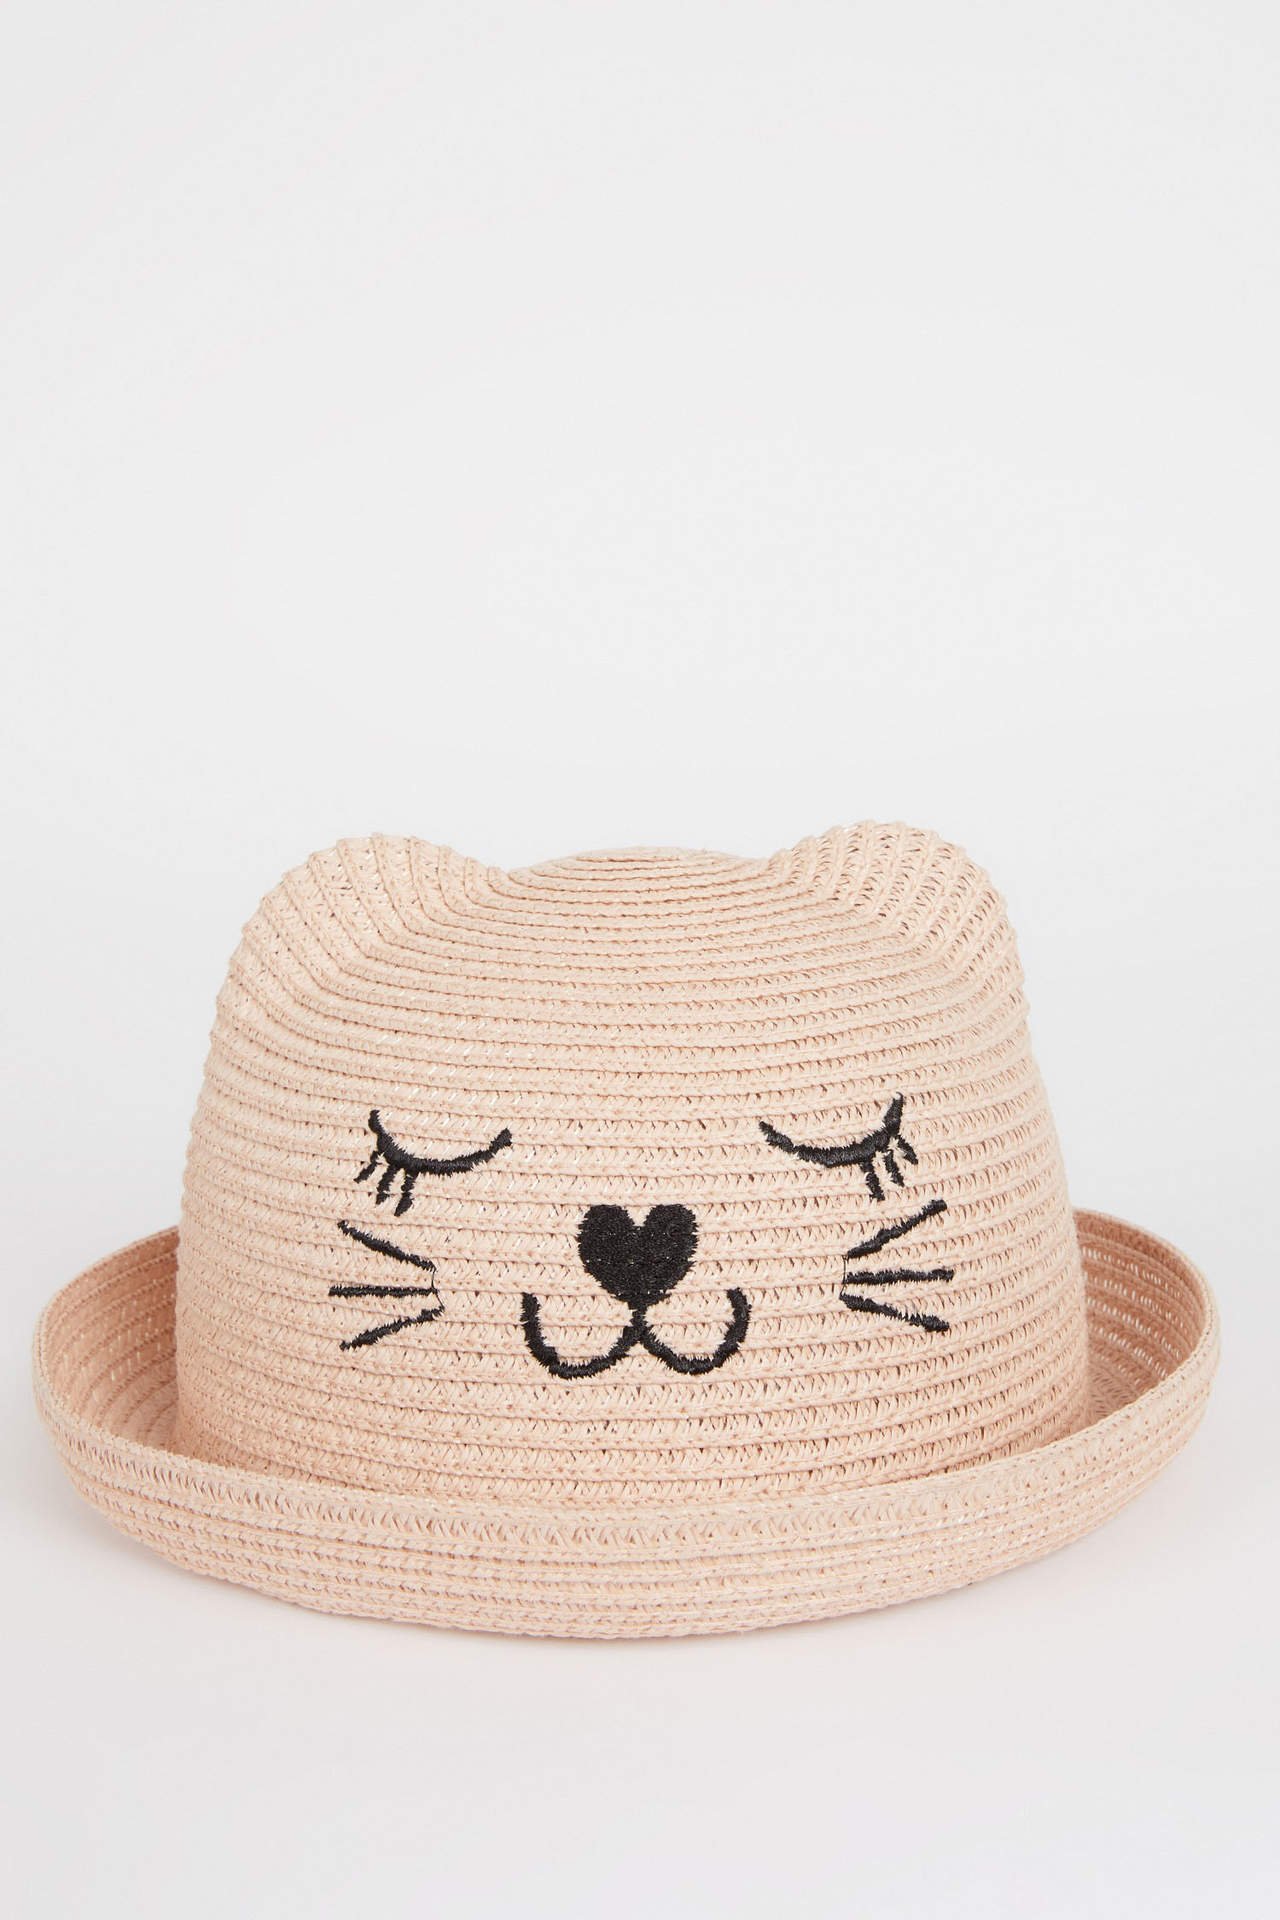 DEFACTO Girl Embroidered Straw Hat